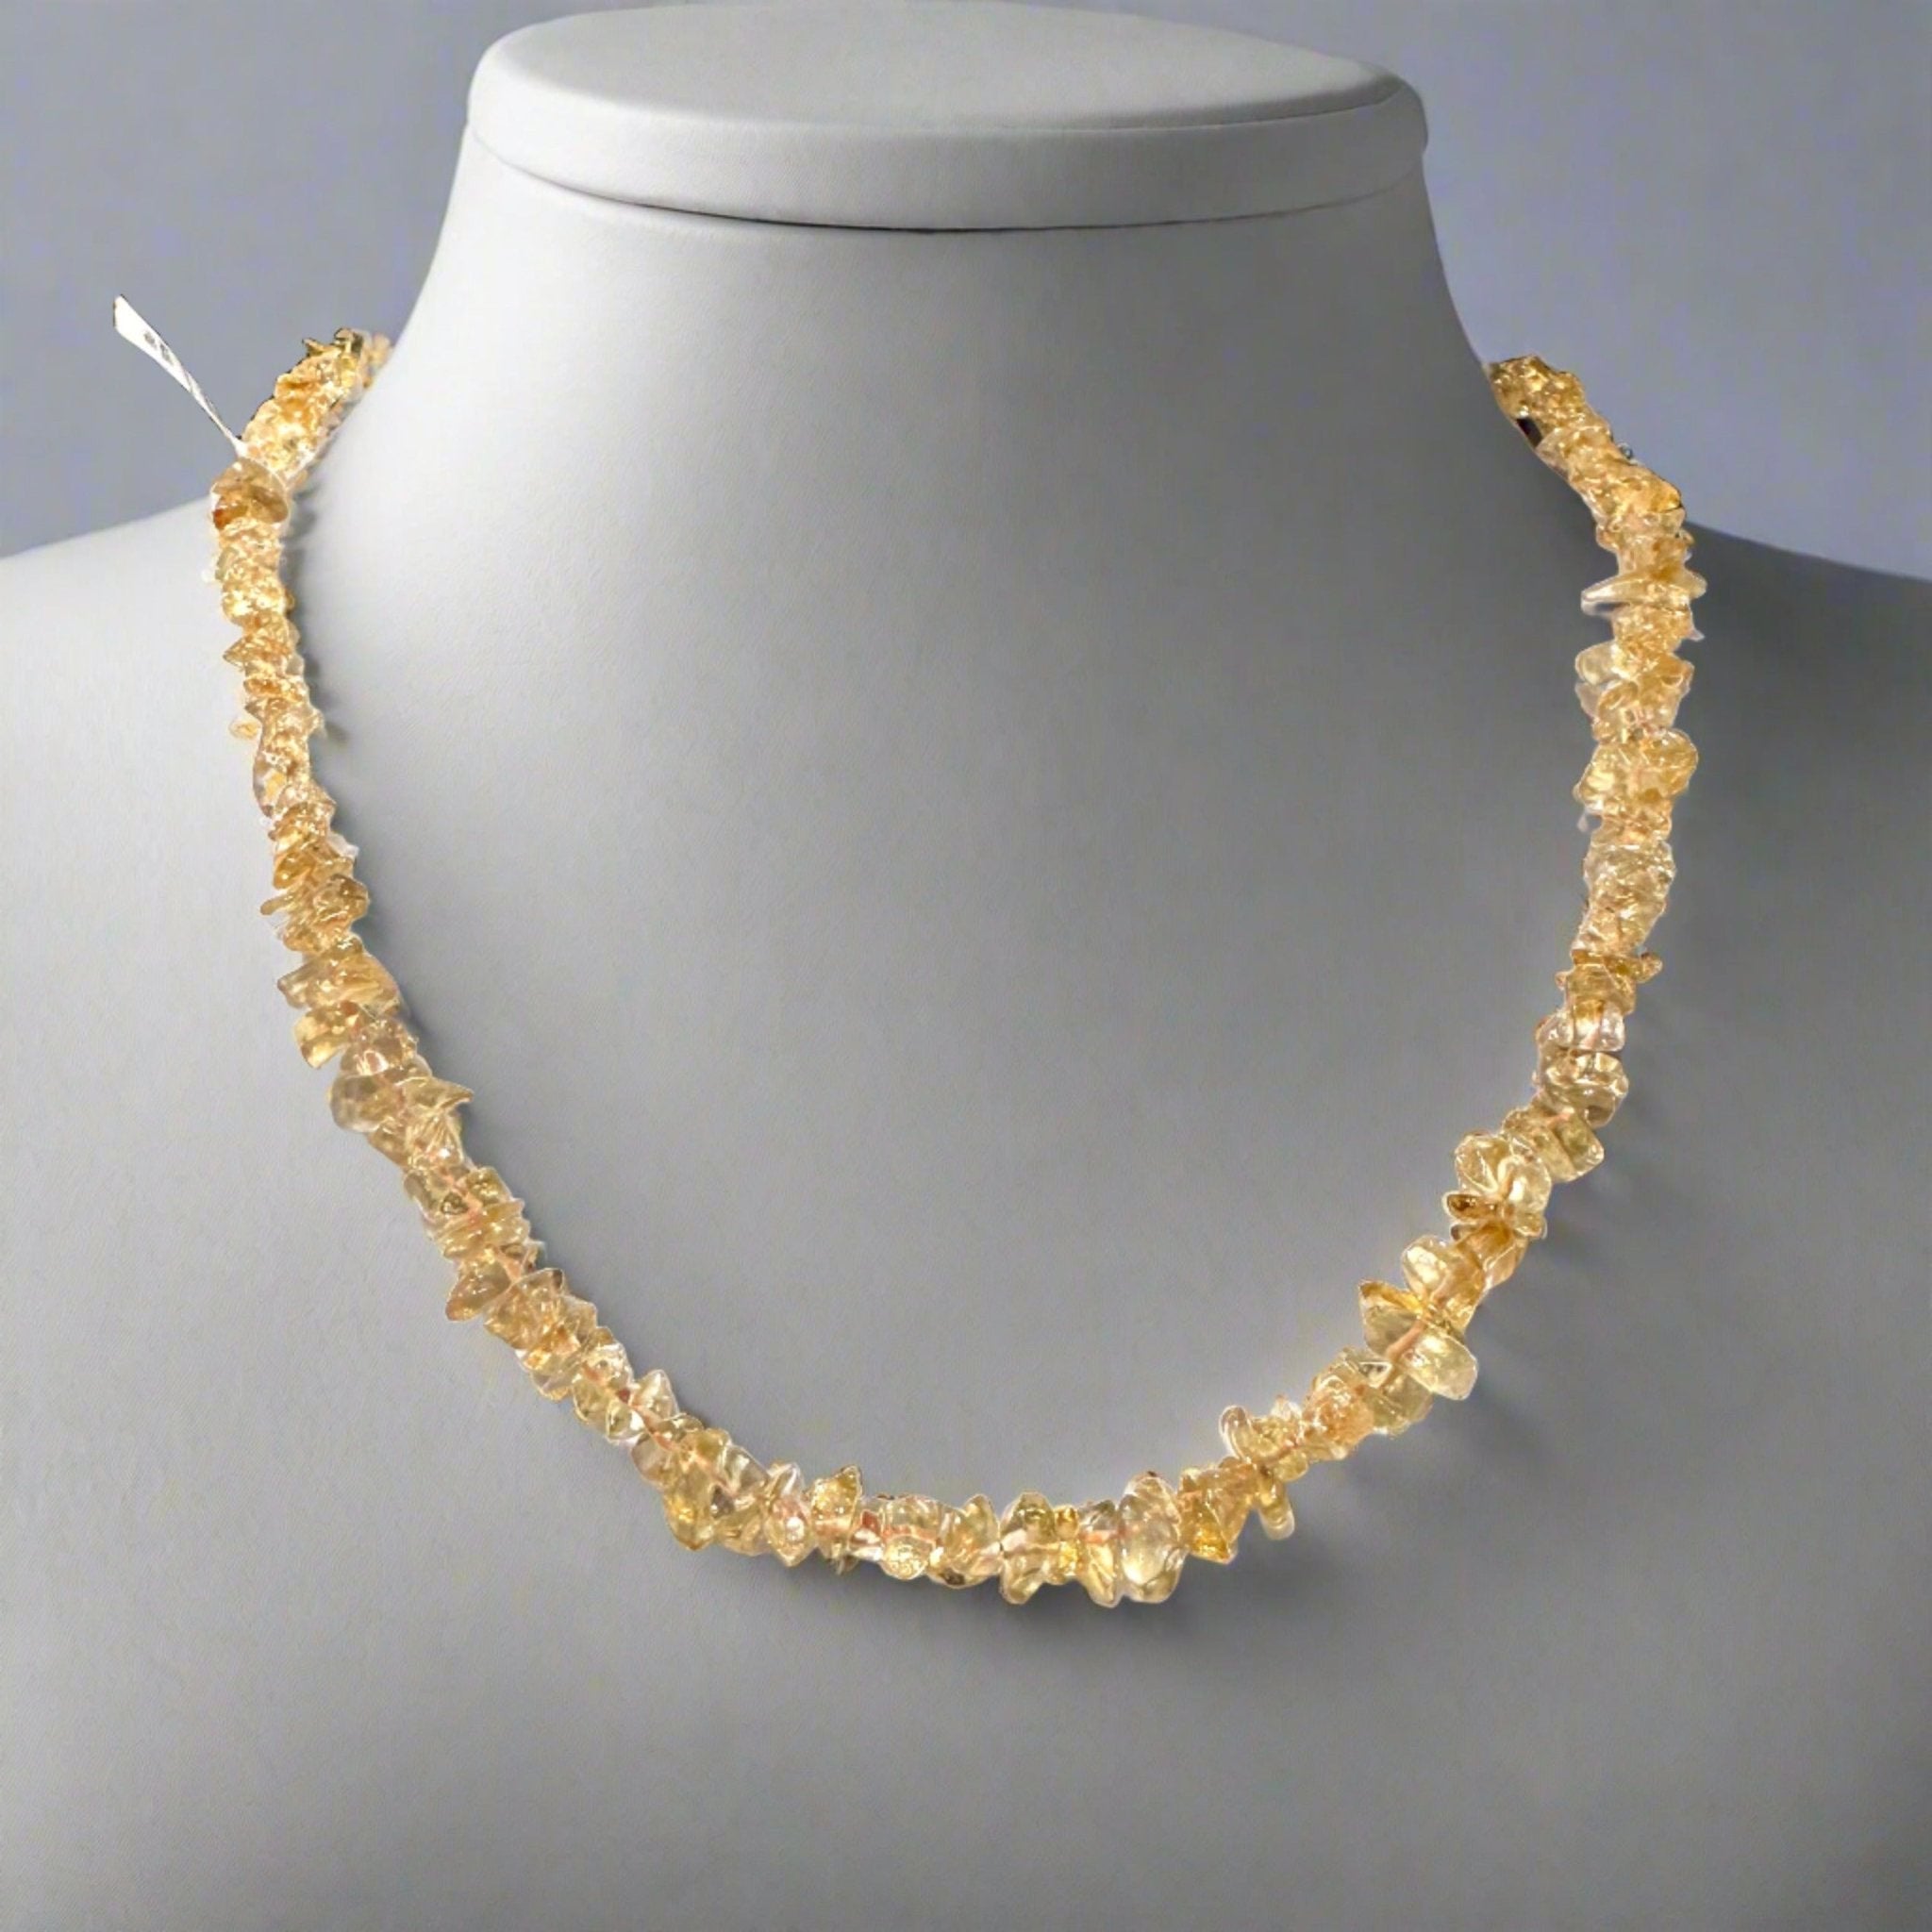 18-Inch Citrine Chip Necklace with Sterling Clasp - Sacred Crystals Chains and Necklaces